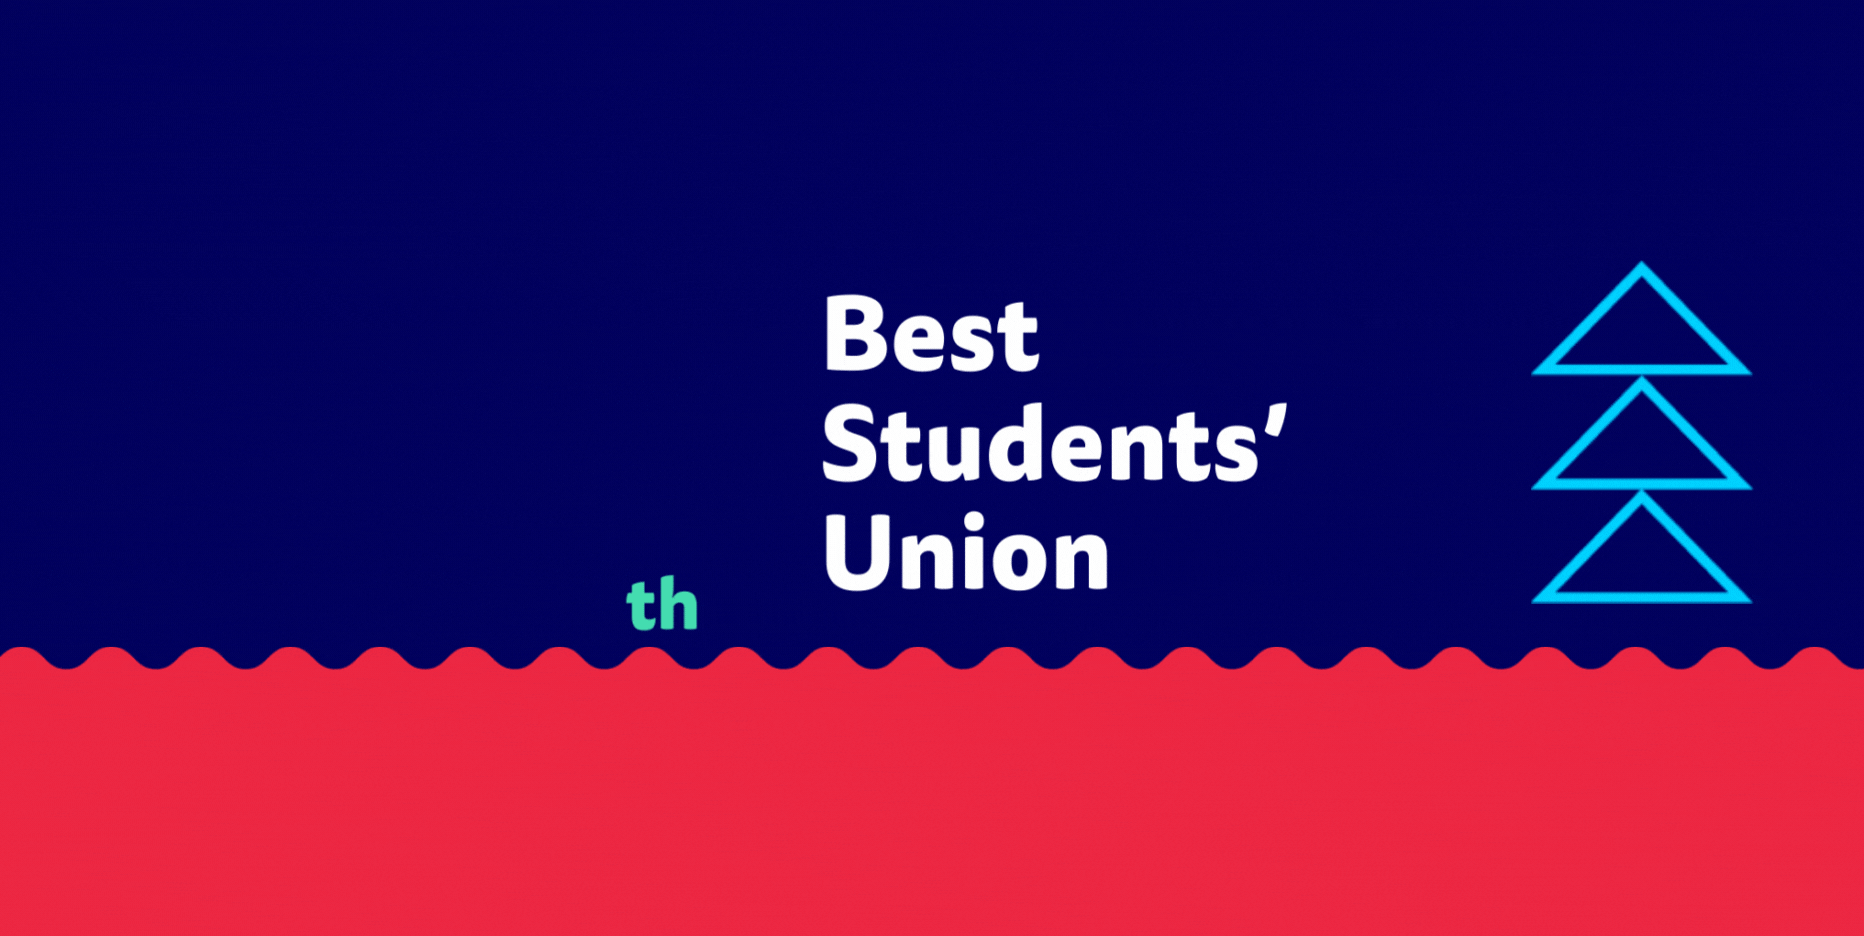 5th Best Students’ Union in the UK